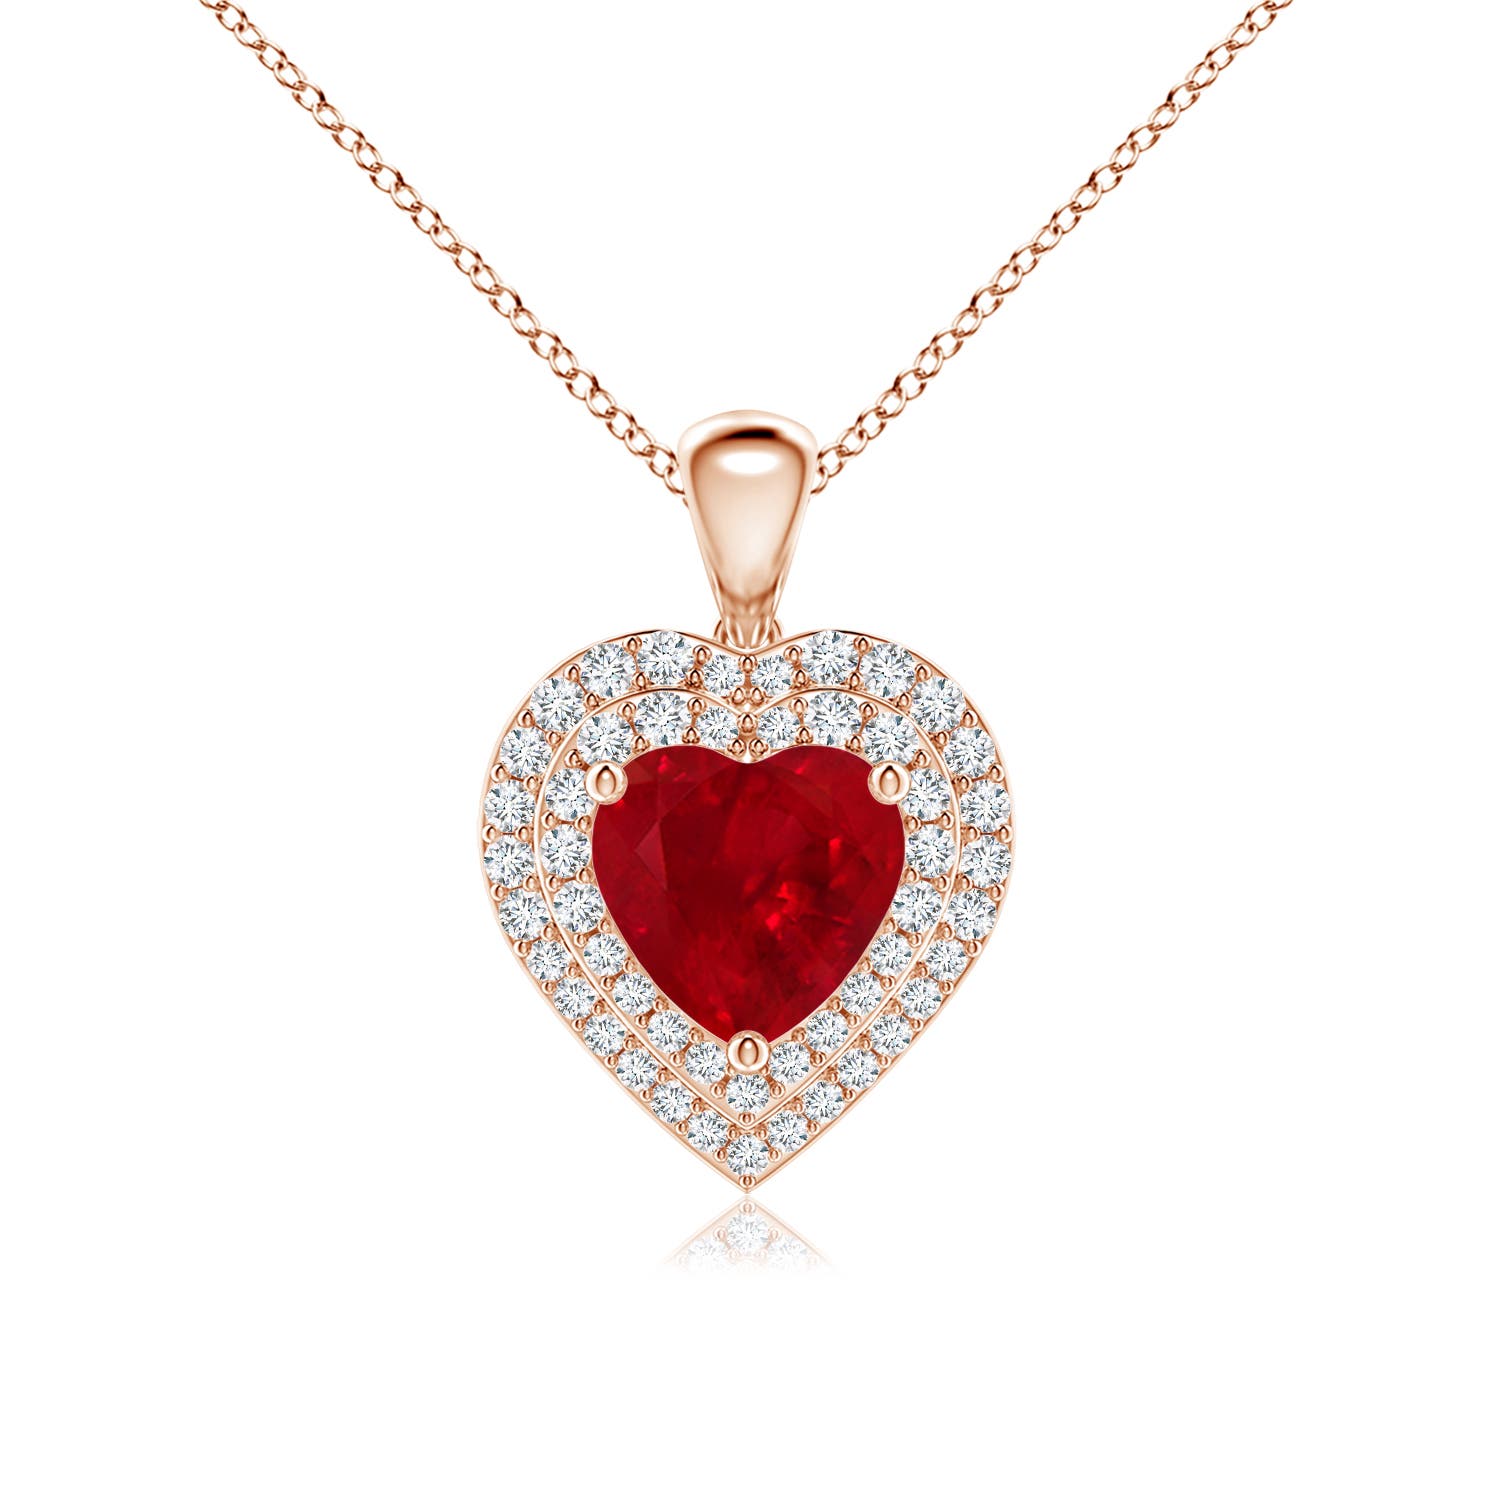 AAA - Ruby / 2.08 CT / 14 KT Rose Gold